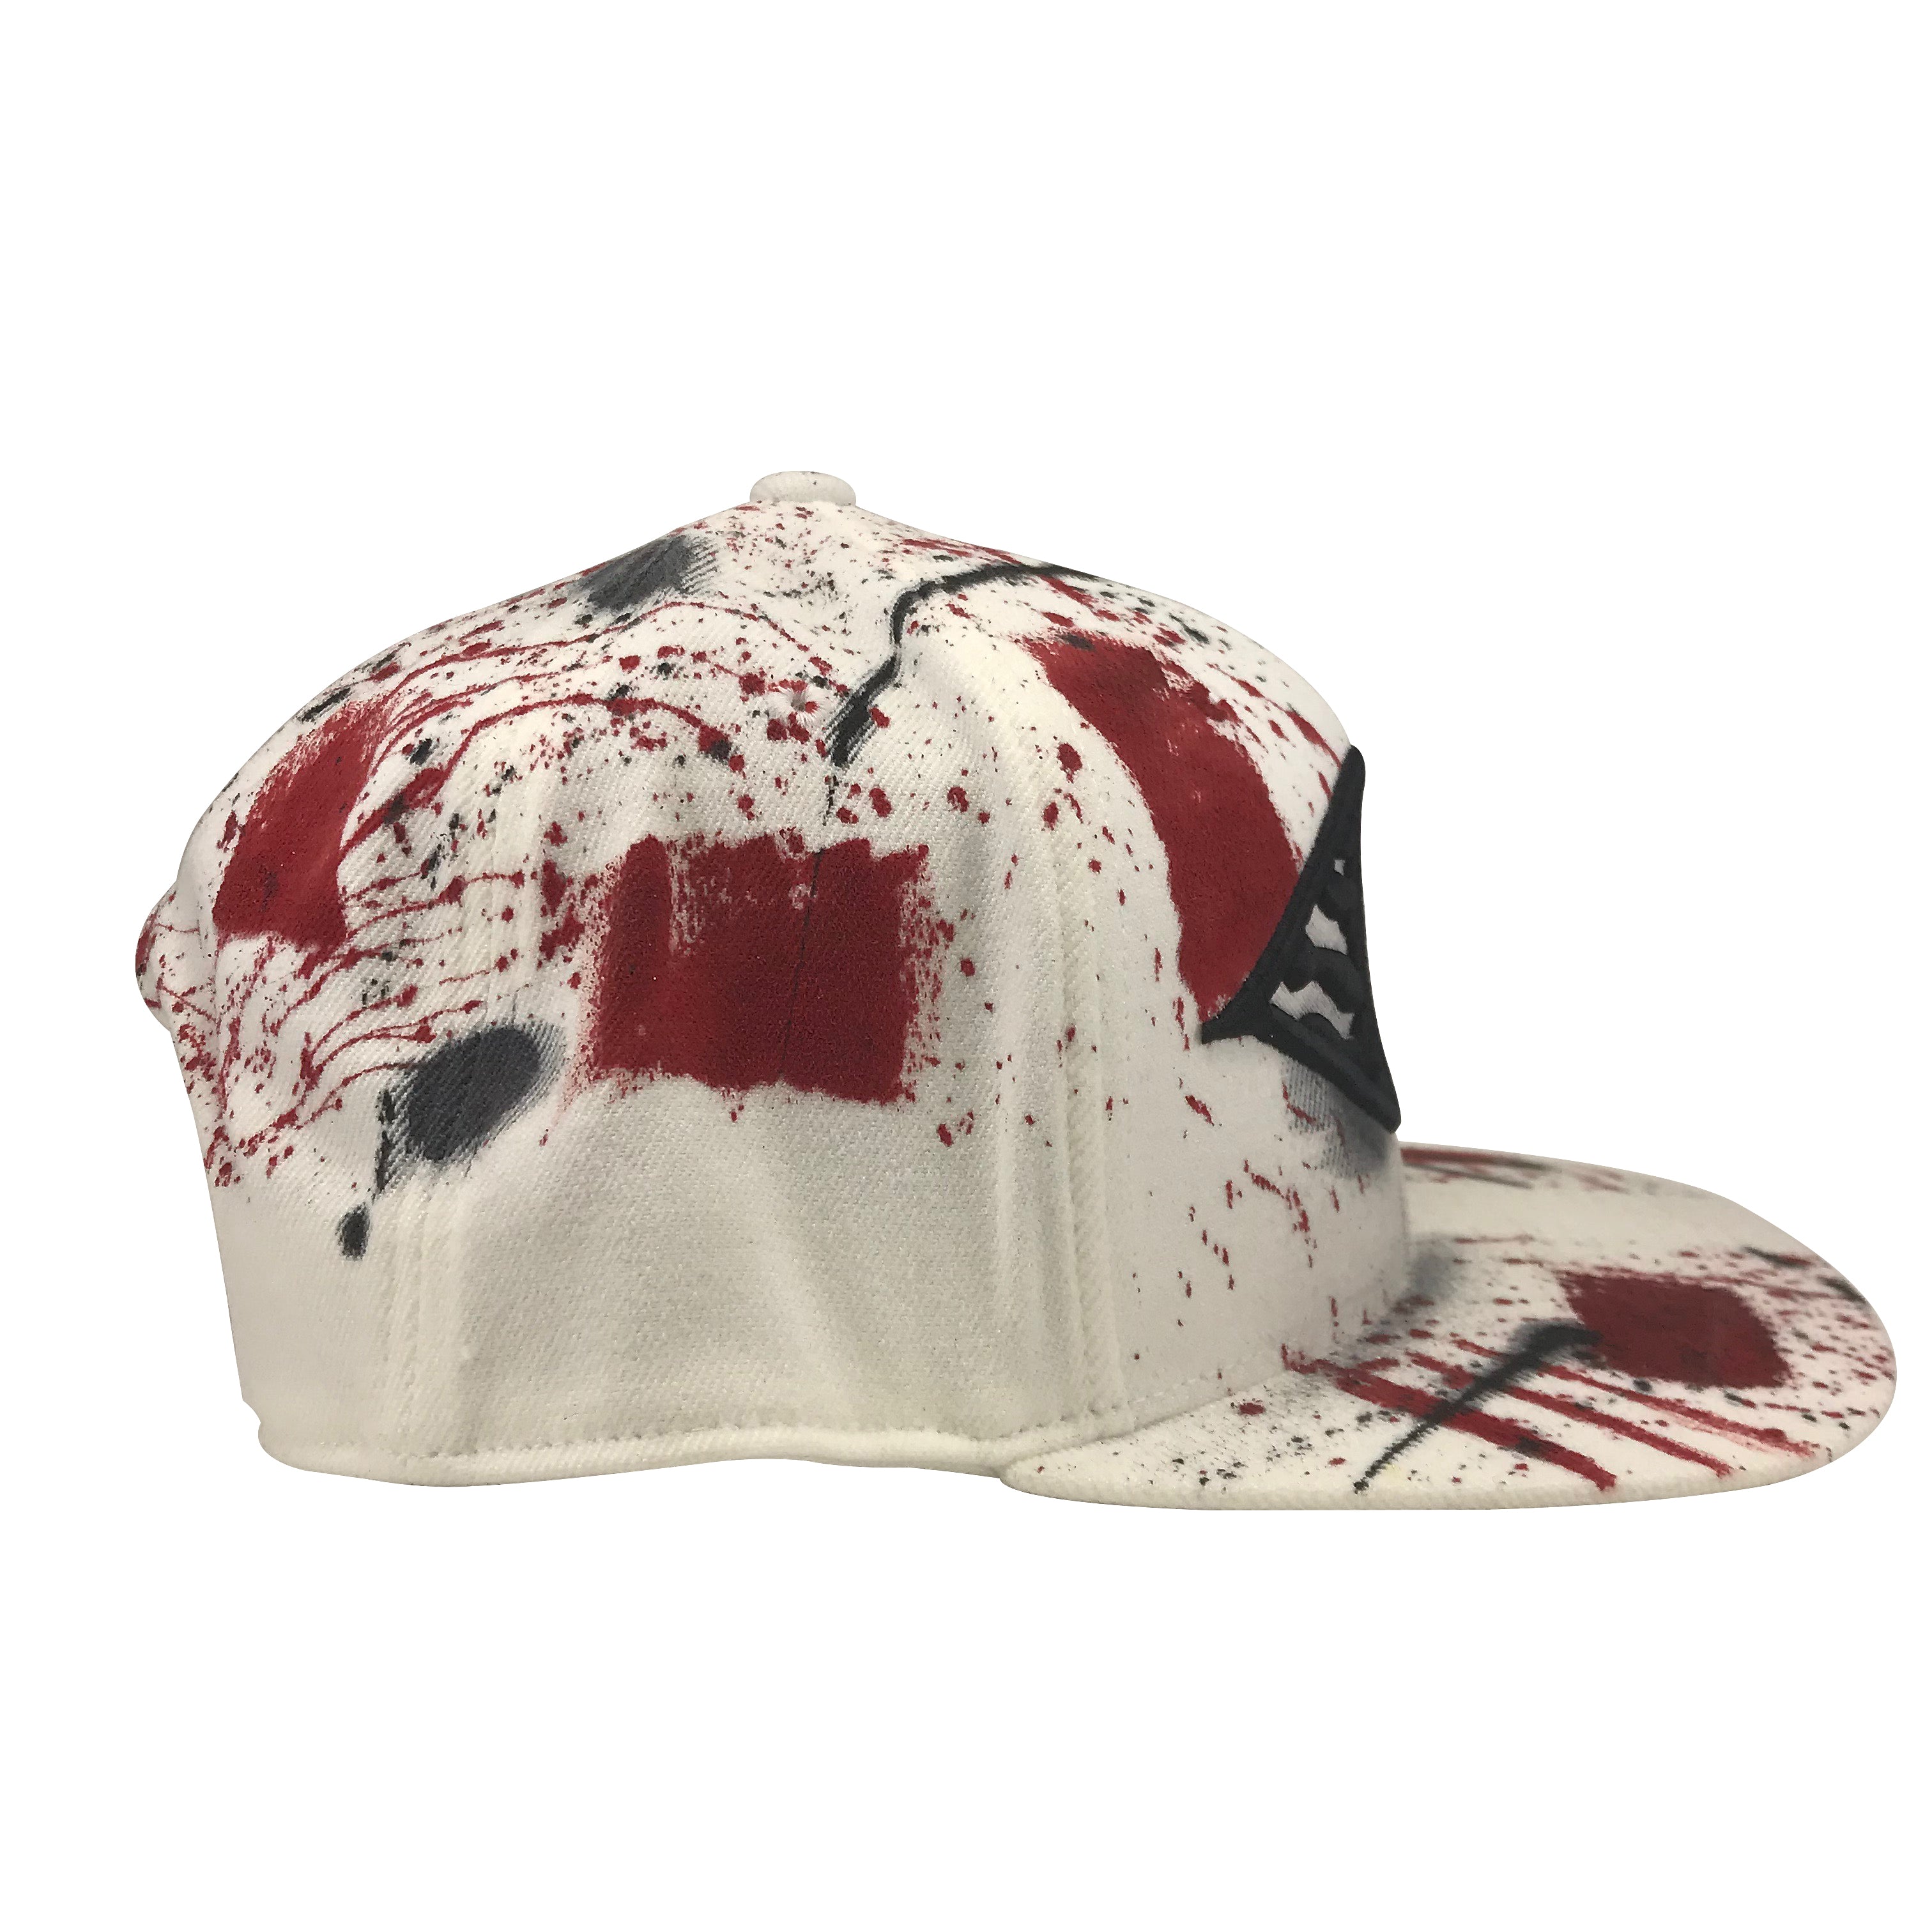 Hat - Unique hand painted / White-black-Red